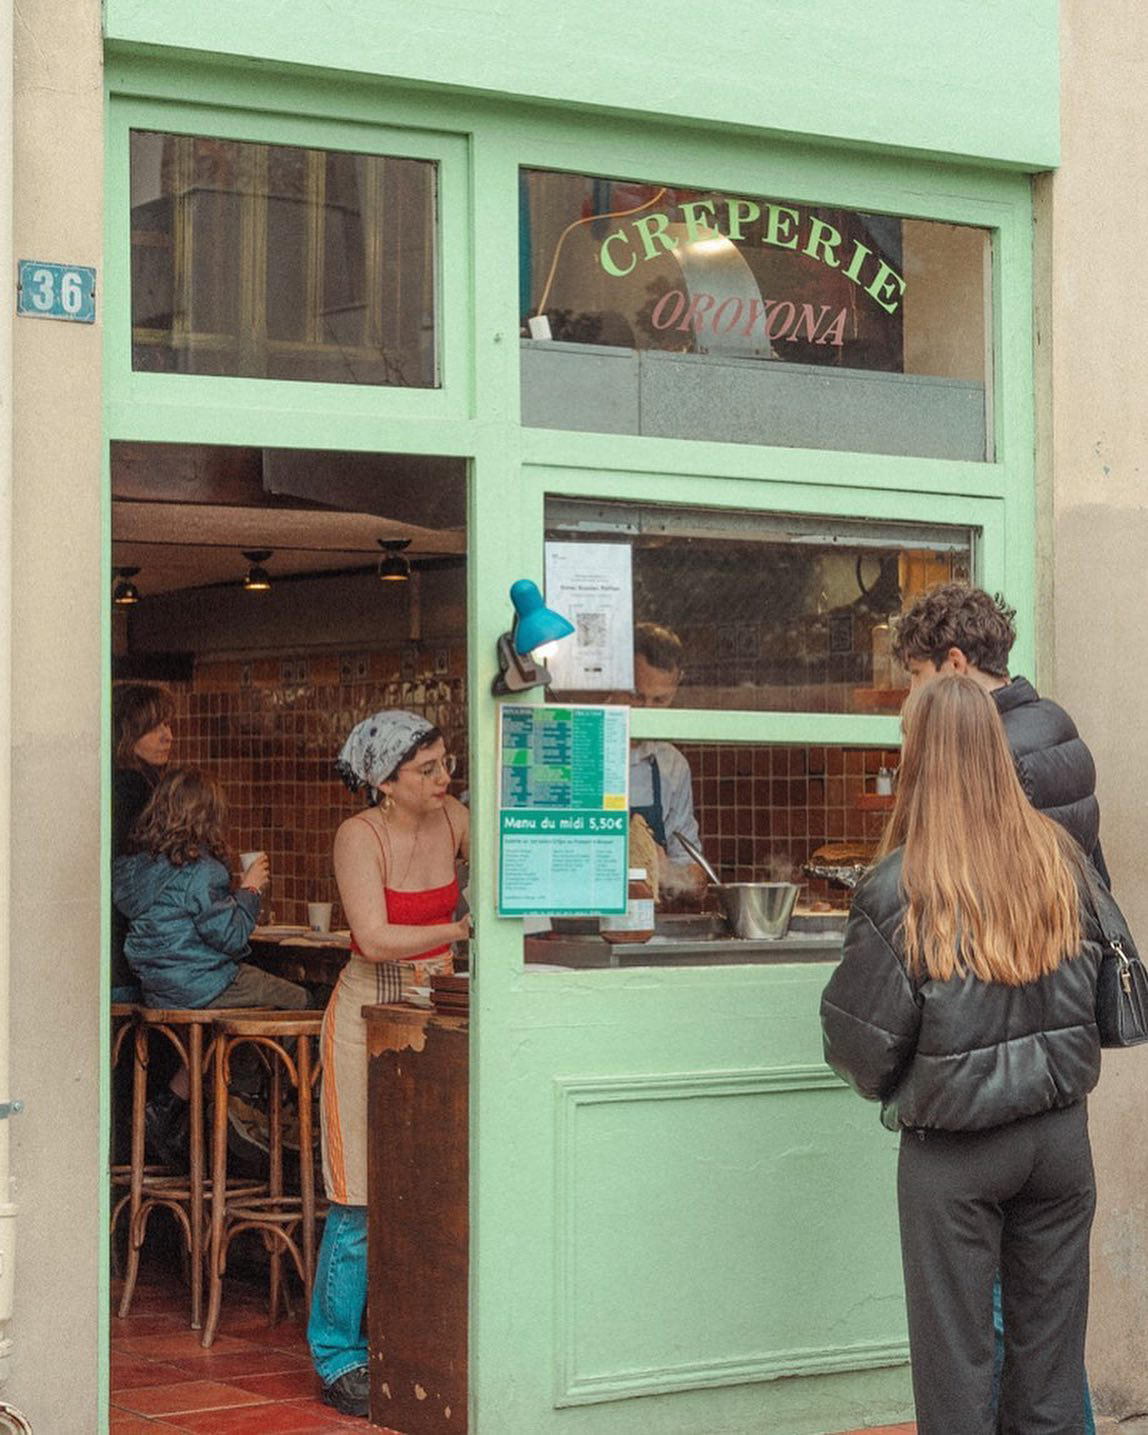 If you’re looking for us, you’ll find us where the crêpes are